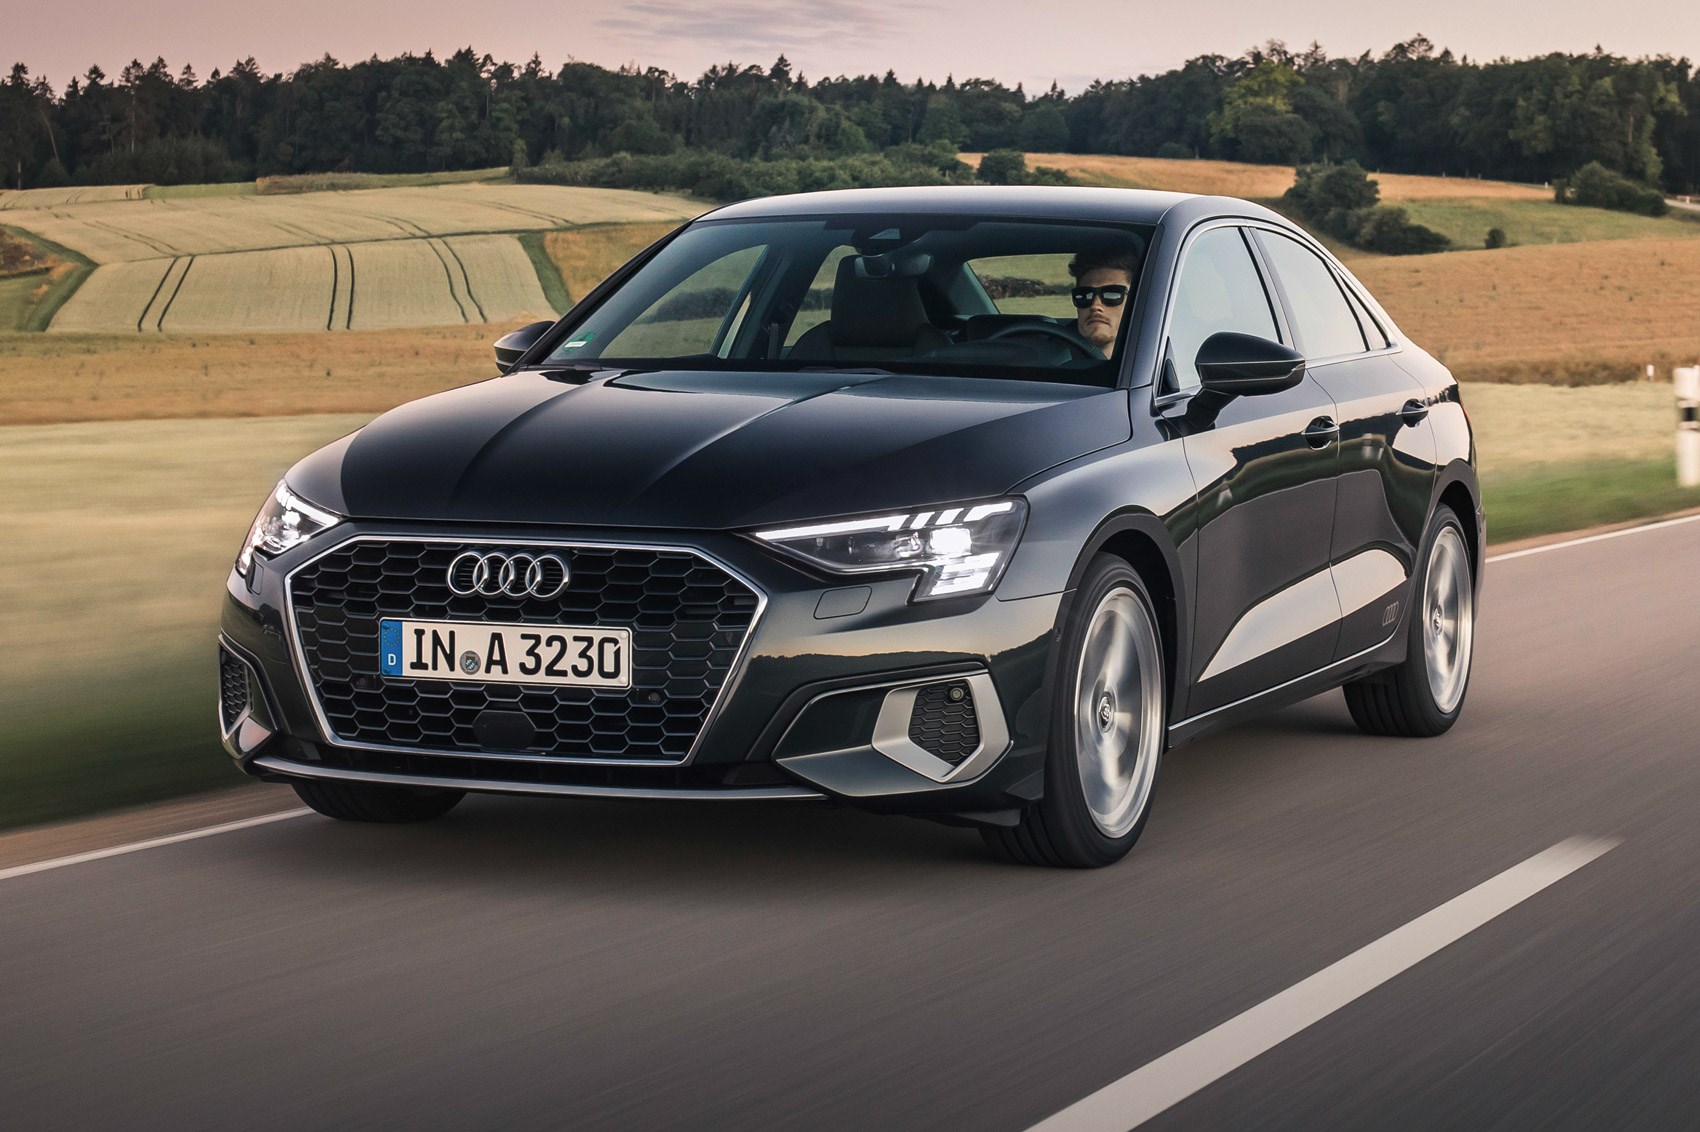 Audi A3 Saloon (2020) review: the baby executive